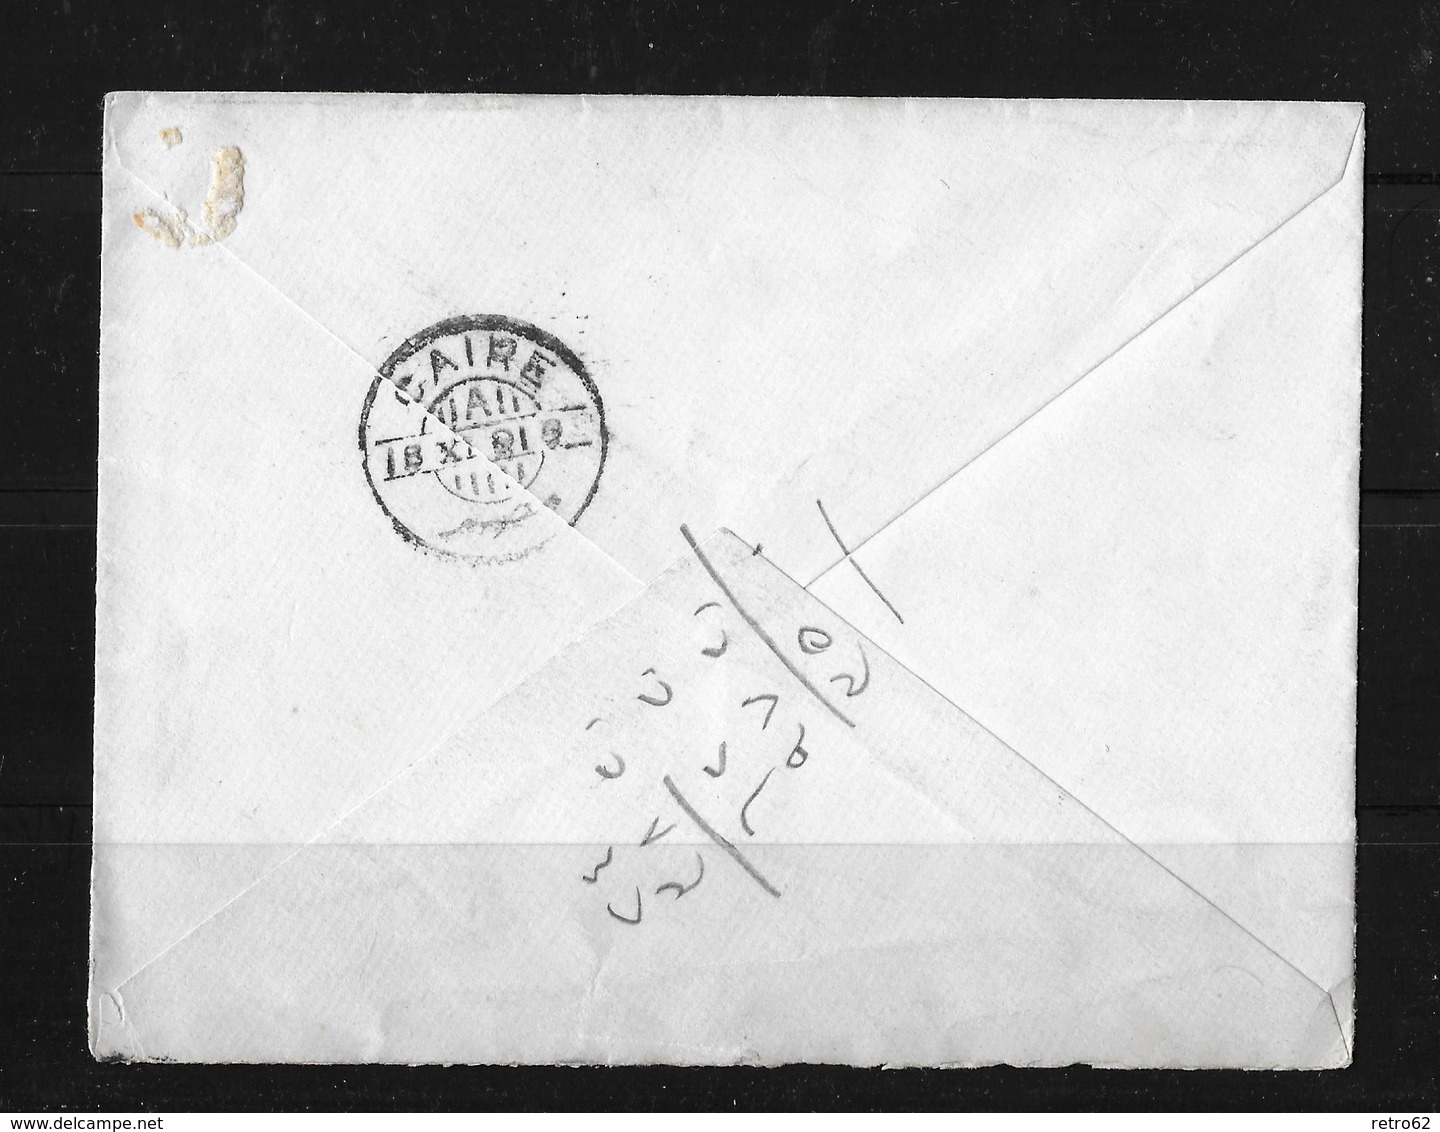 ÄGYPTEN / EGYPT POSTAGE 1921 - Letter From Cairo To Suisse - 1915-1921 British Protectorate